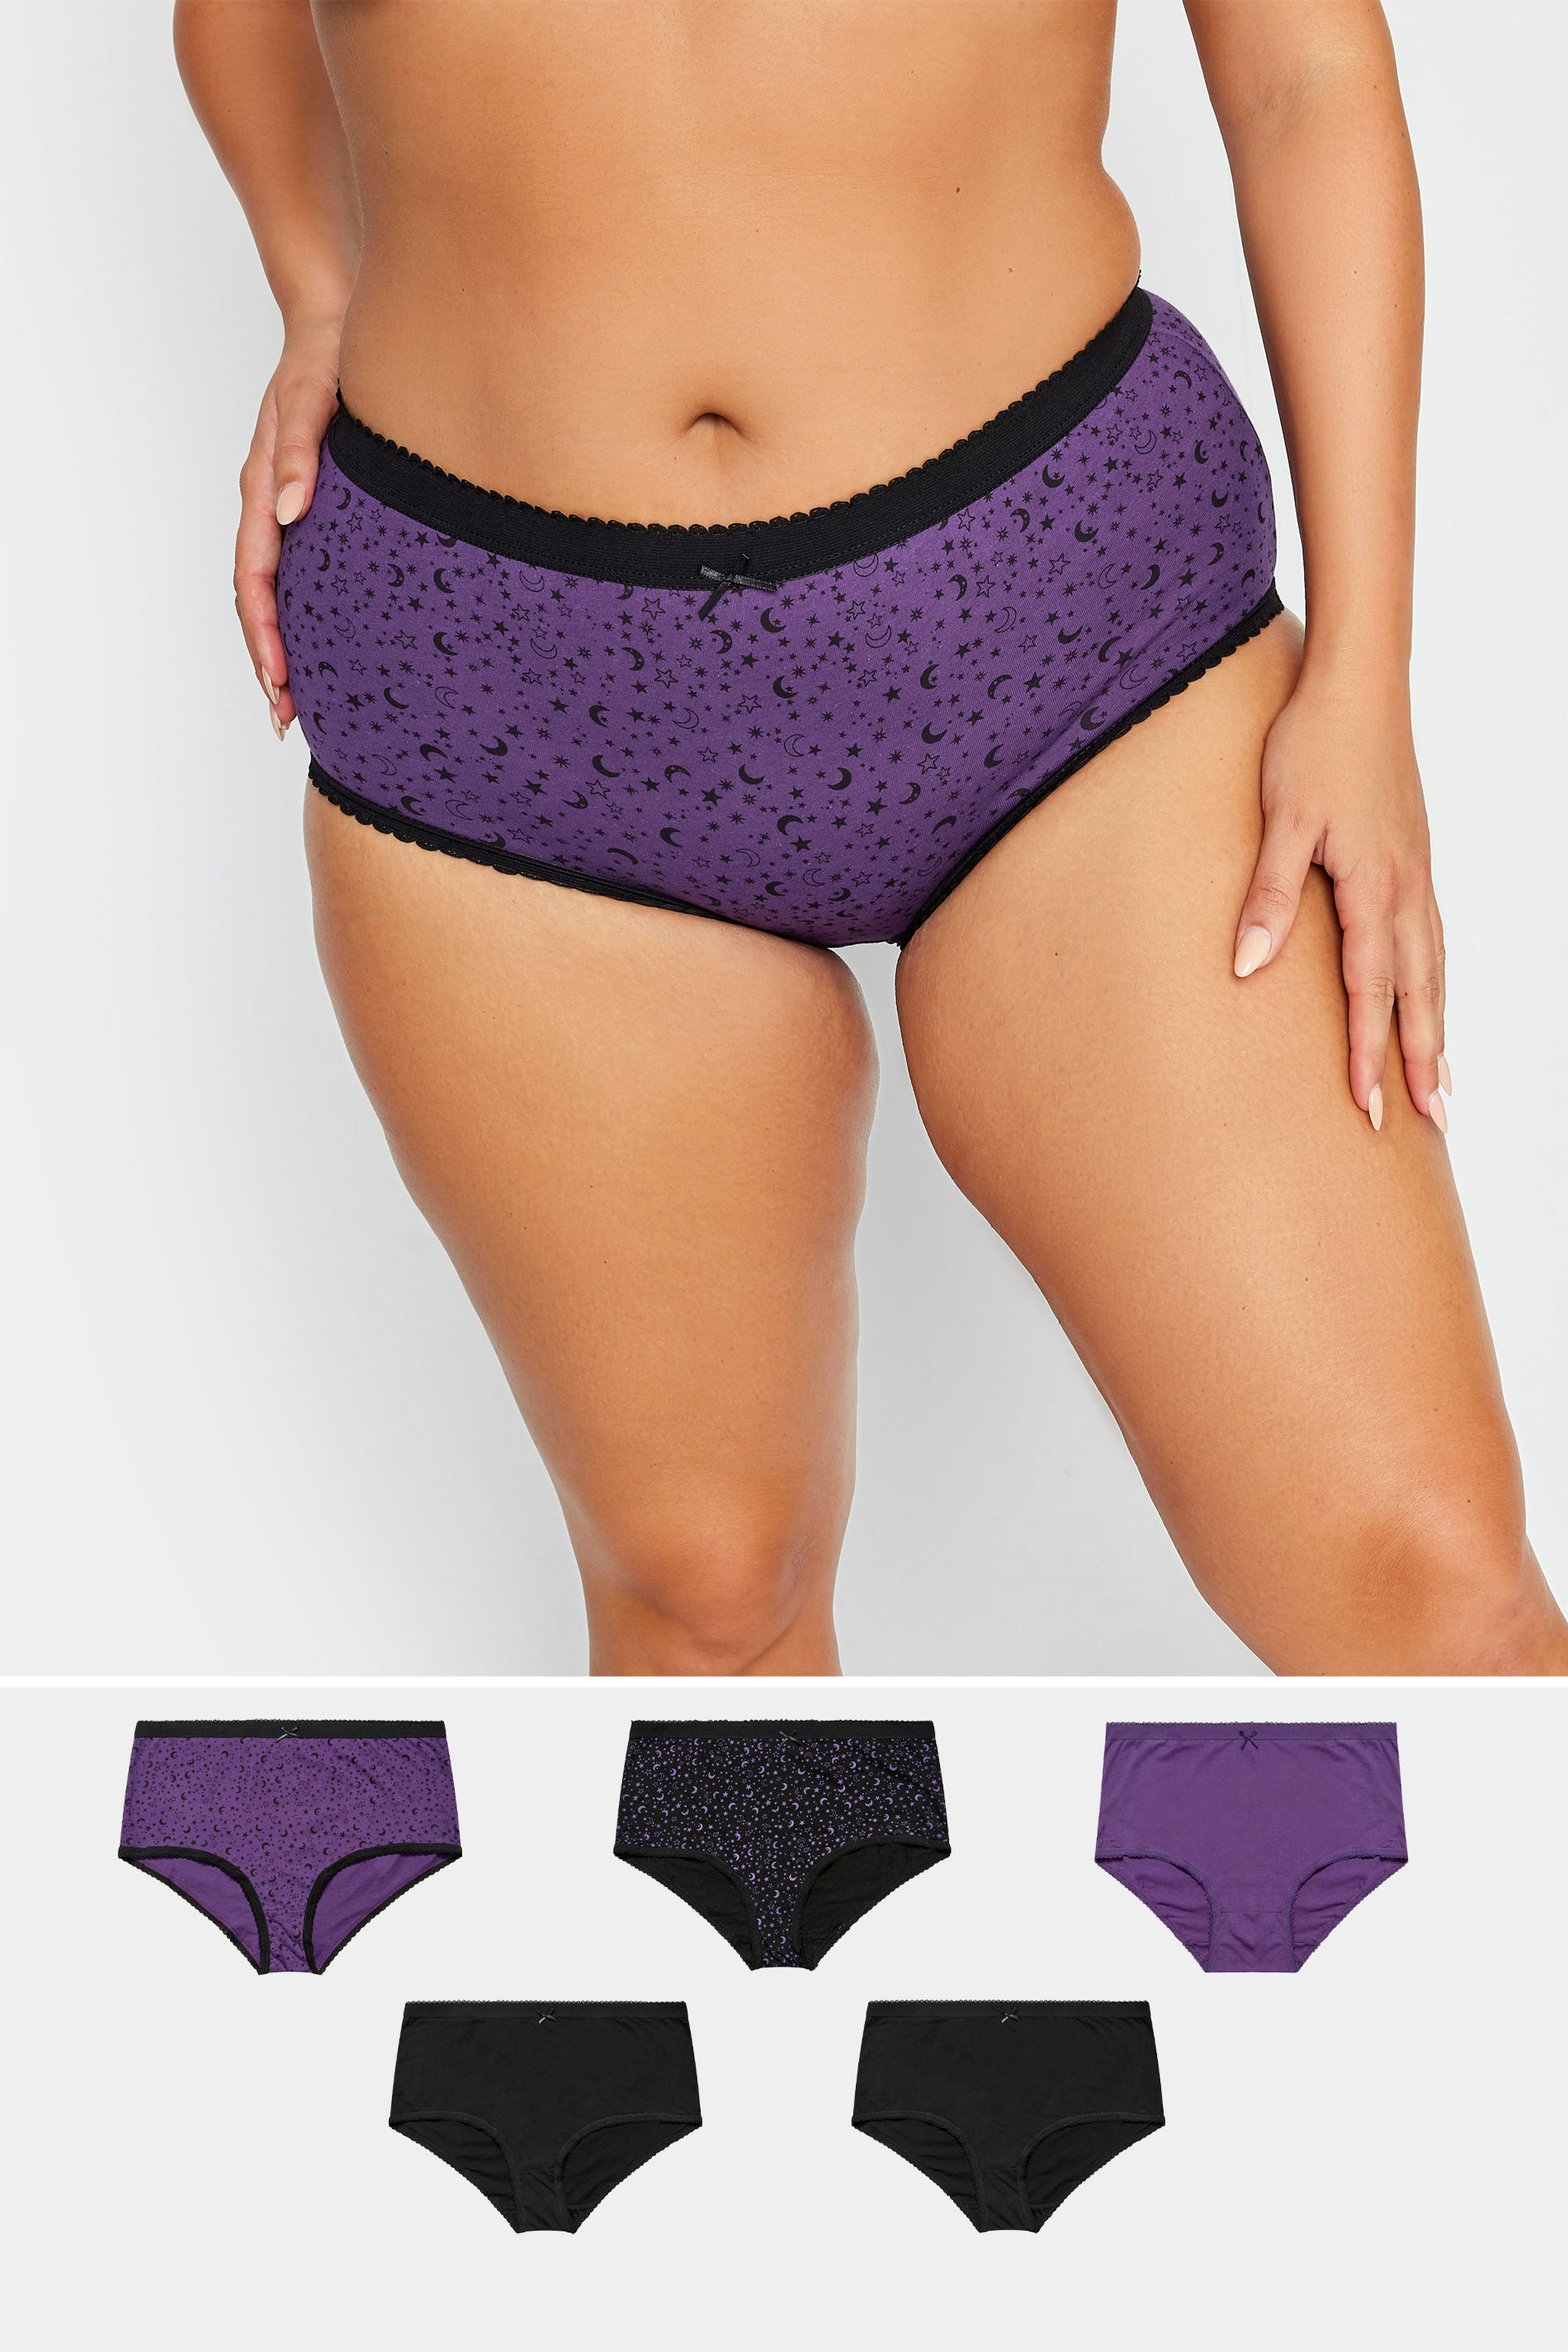 YOURS 5 PACK Plus Size Black & Purple High Waisted Full Briefs